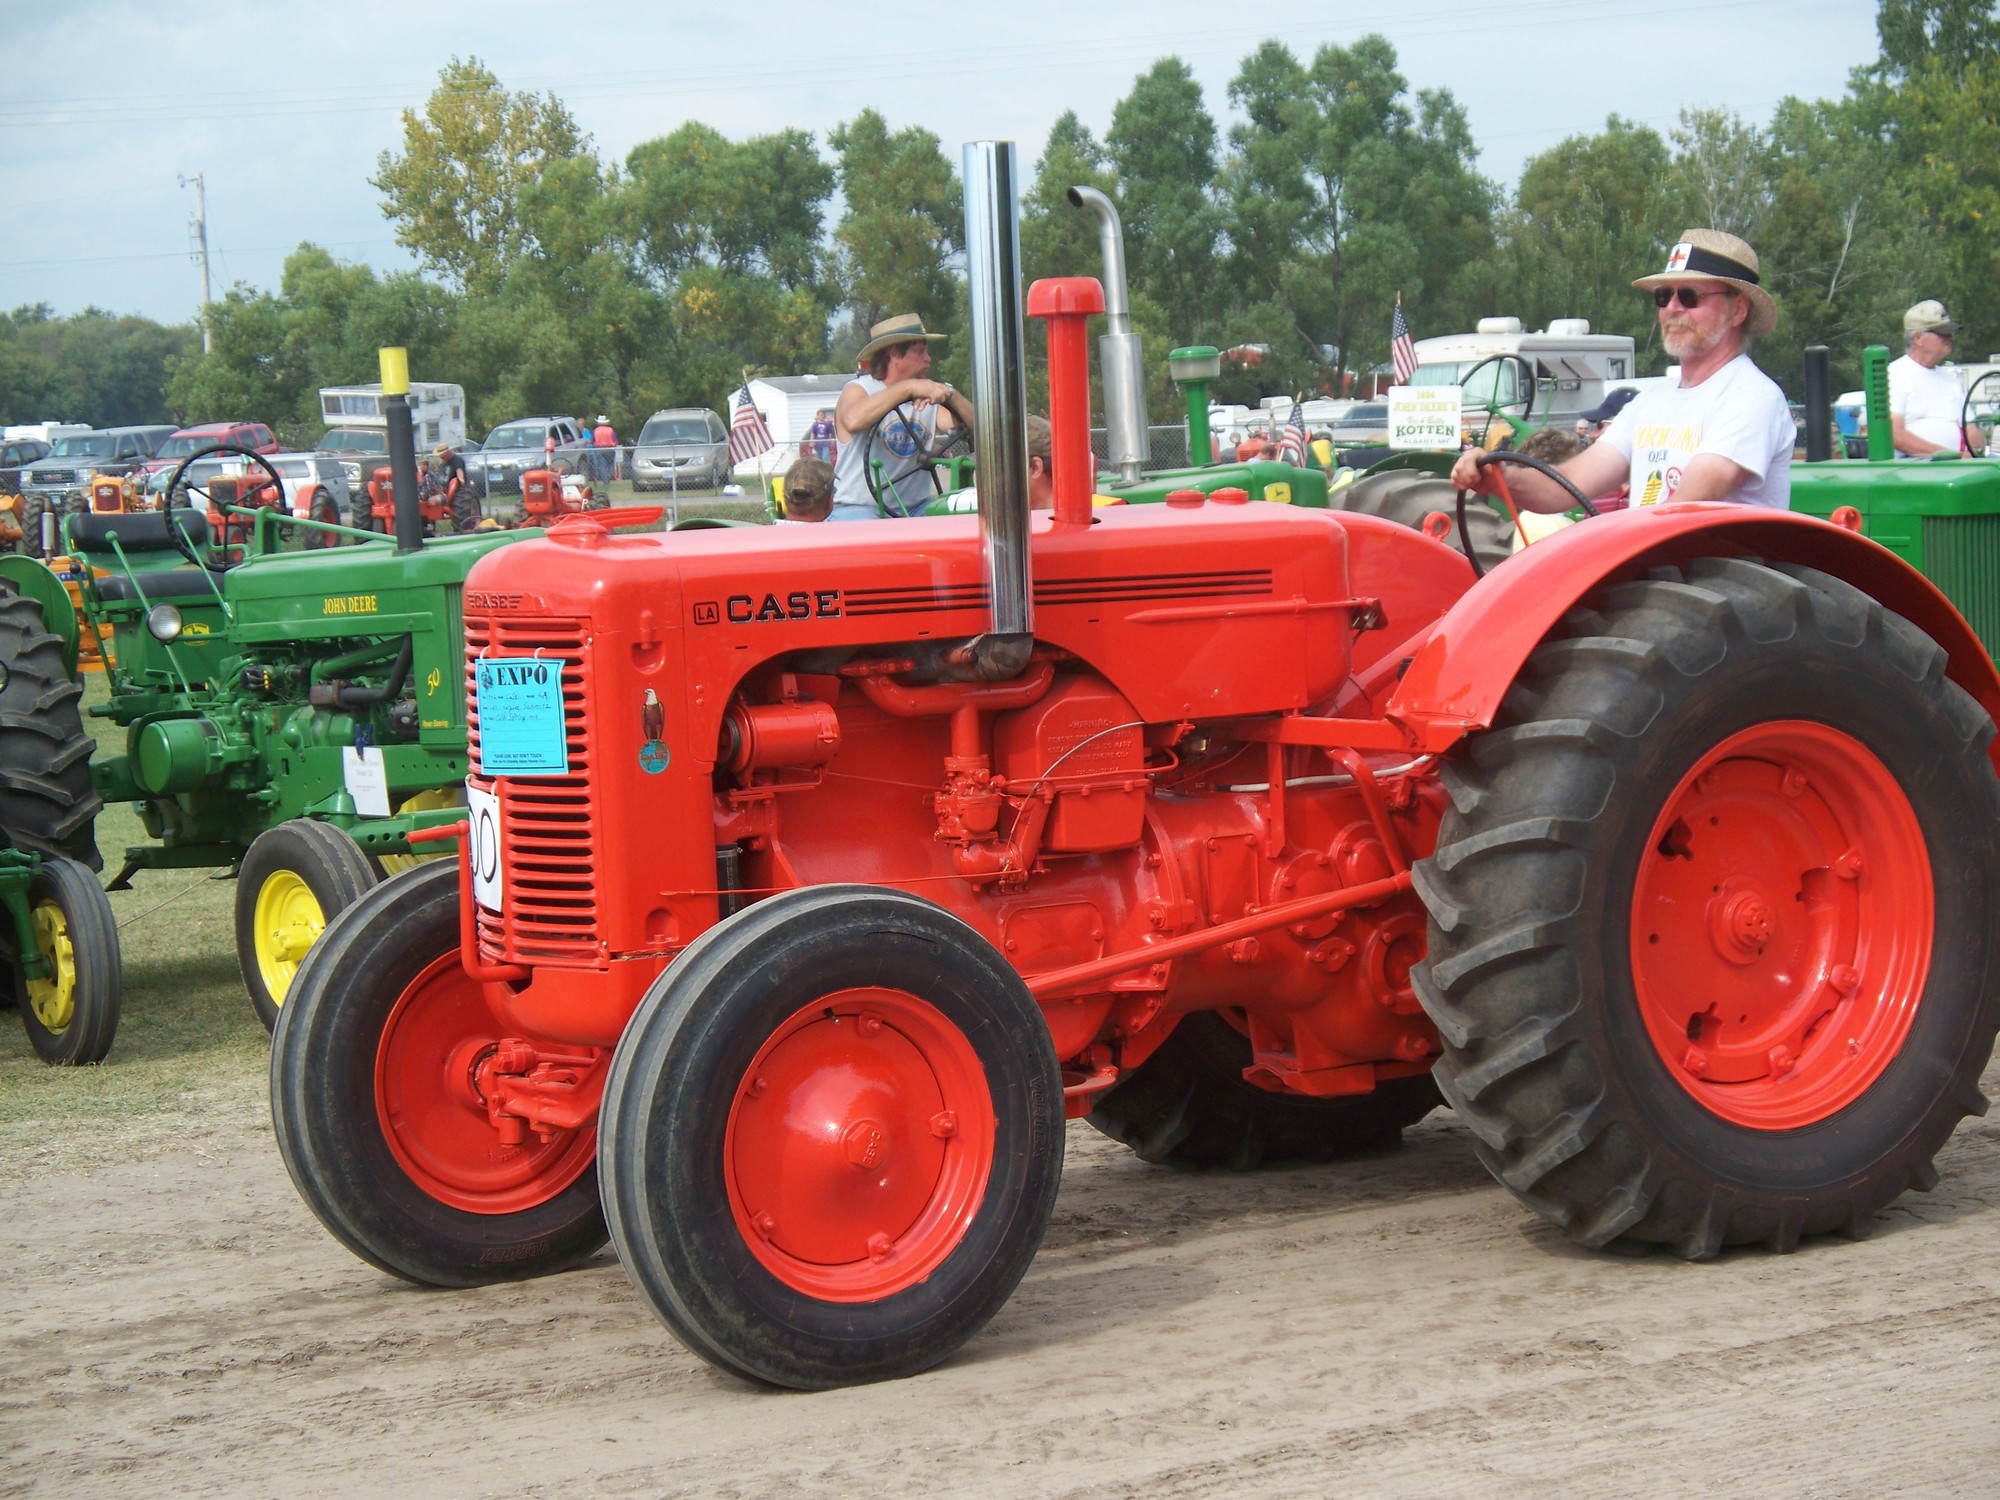 A vintage red Case tractor